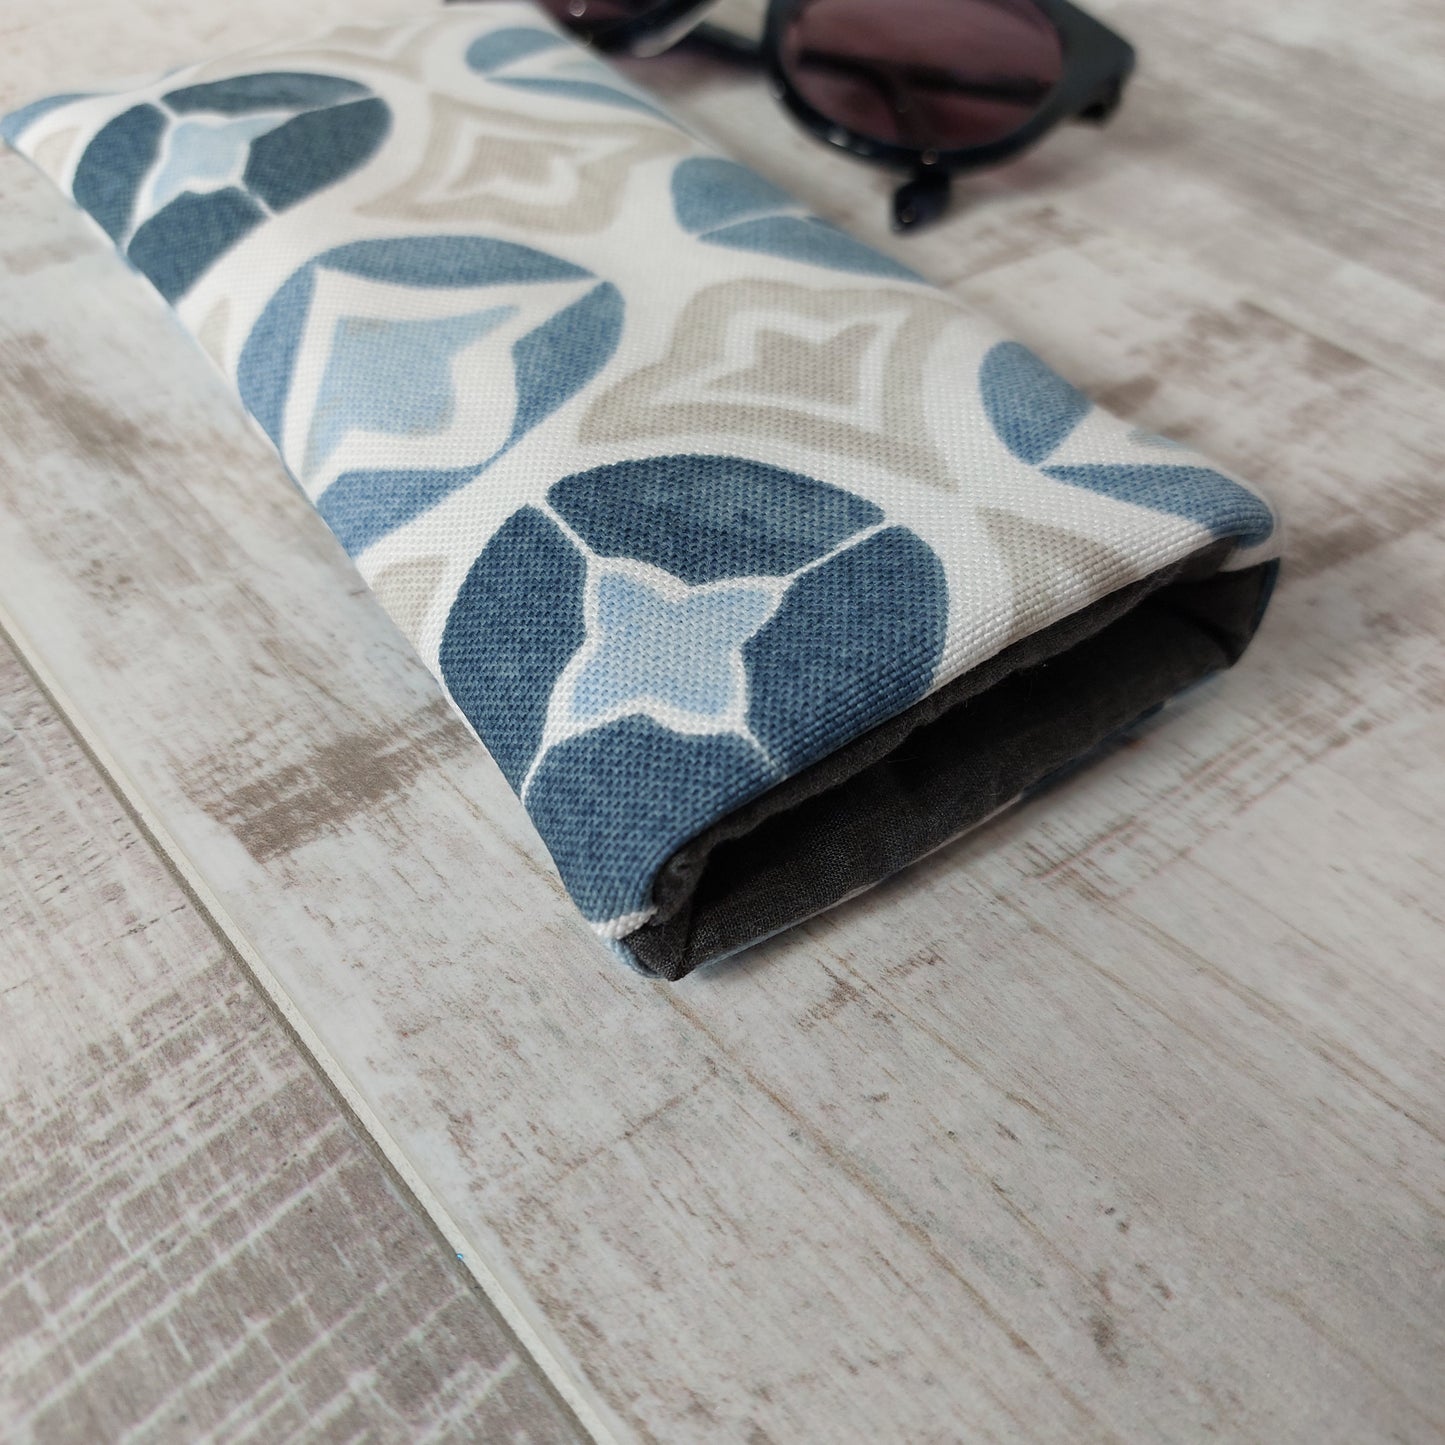 Blue and Grey Tile Effect sunglasses case